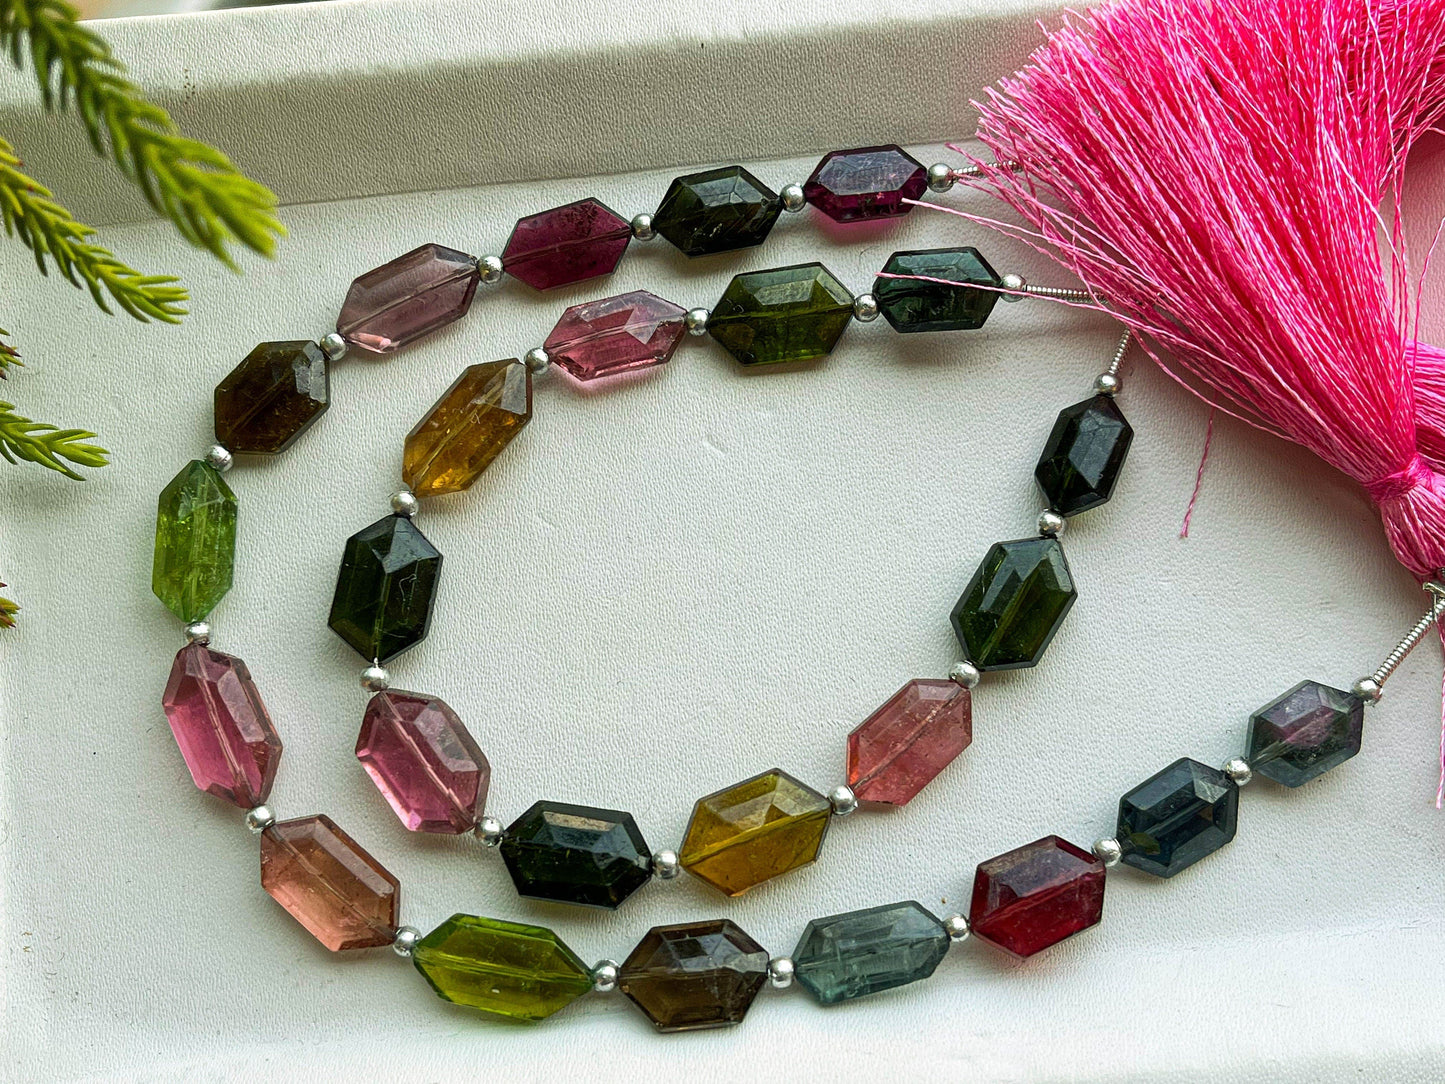 Tourmaline Hexagon Shape Faceted Briolette Beads, Natural Multi Tourmaline Beads, Tourmaline Briolette Beads, 11 / 14 Pieces Beadsforyourjewelry